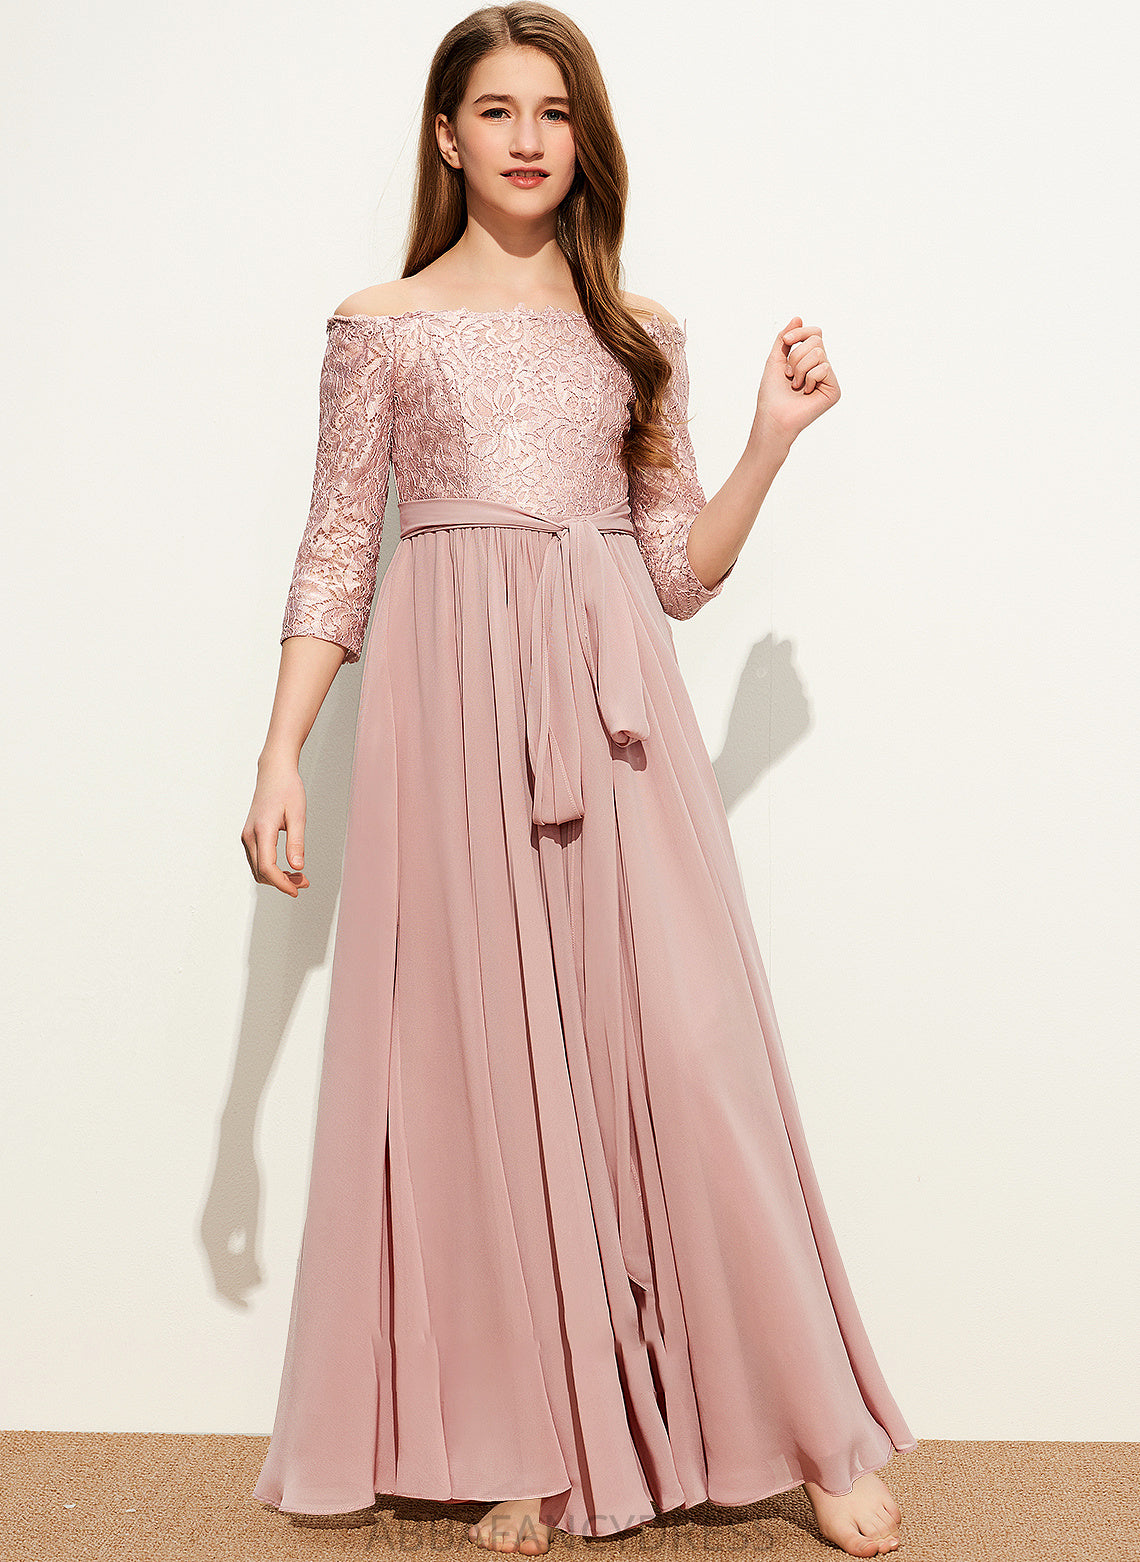 With Cornelia Off-the-Shoulder Lace A-Line Floor-Length Junior Bridesmaid Dresses Bow(s) Chiffon